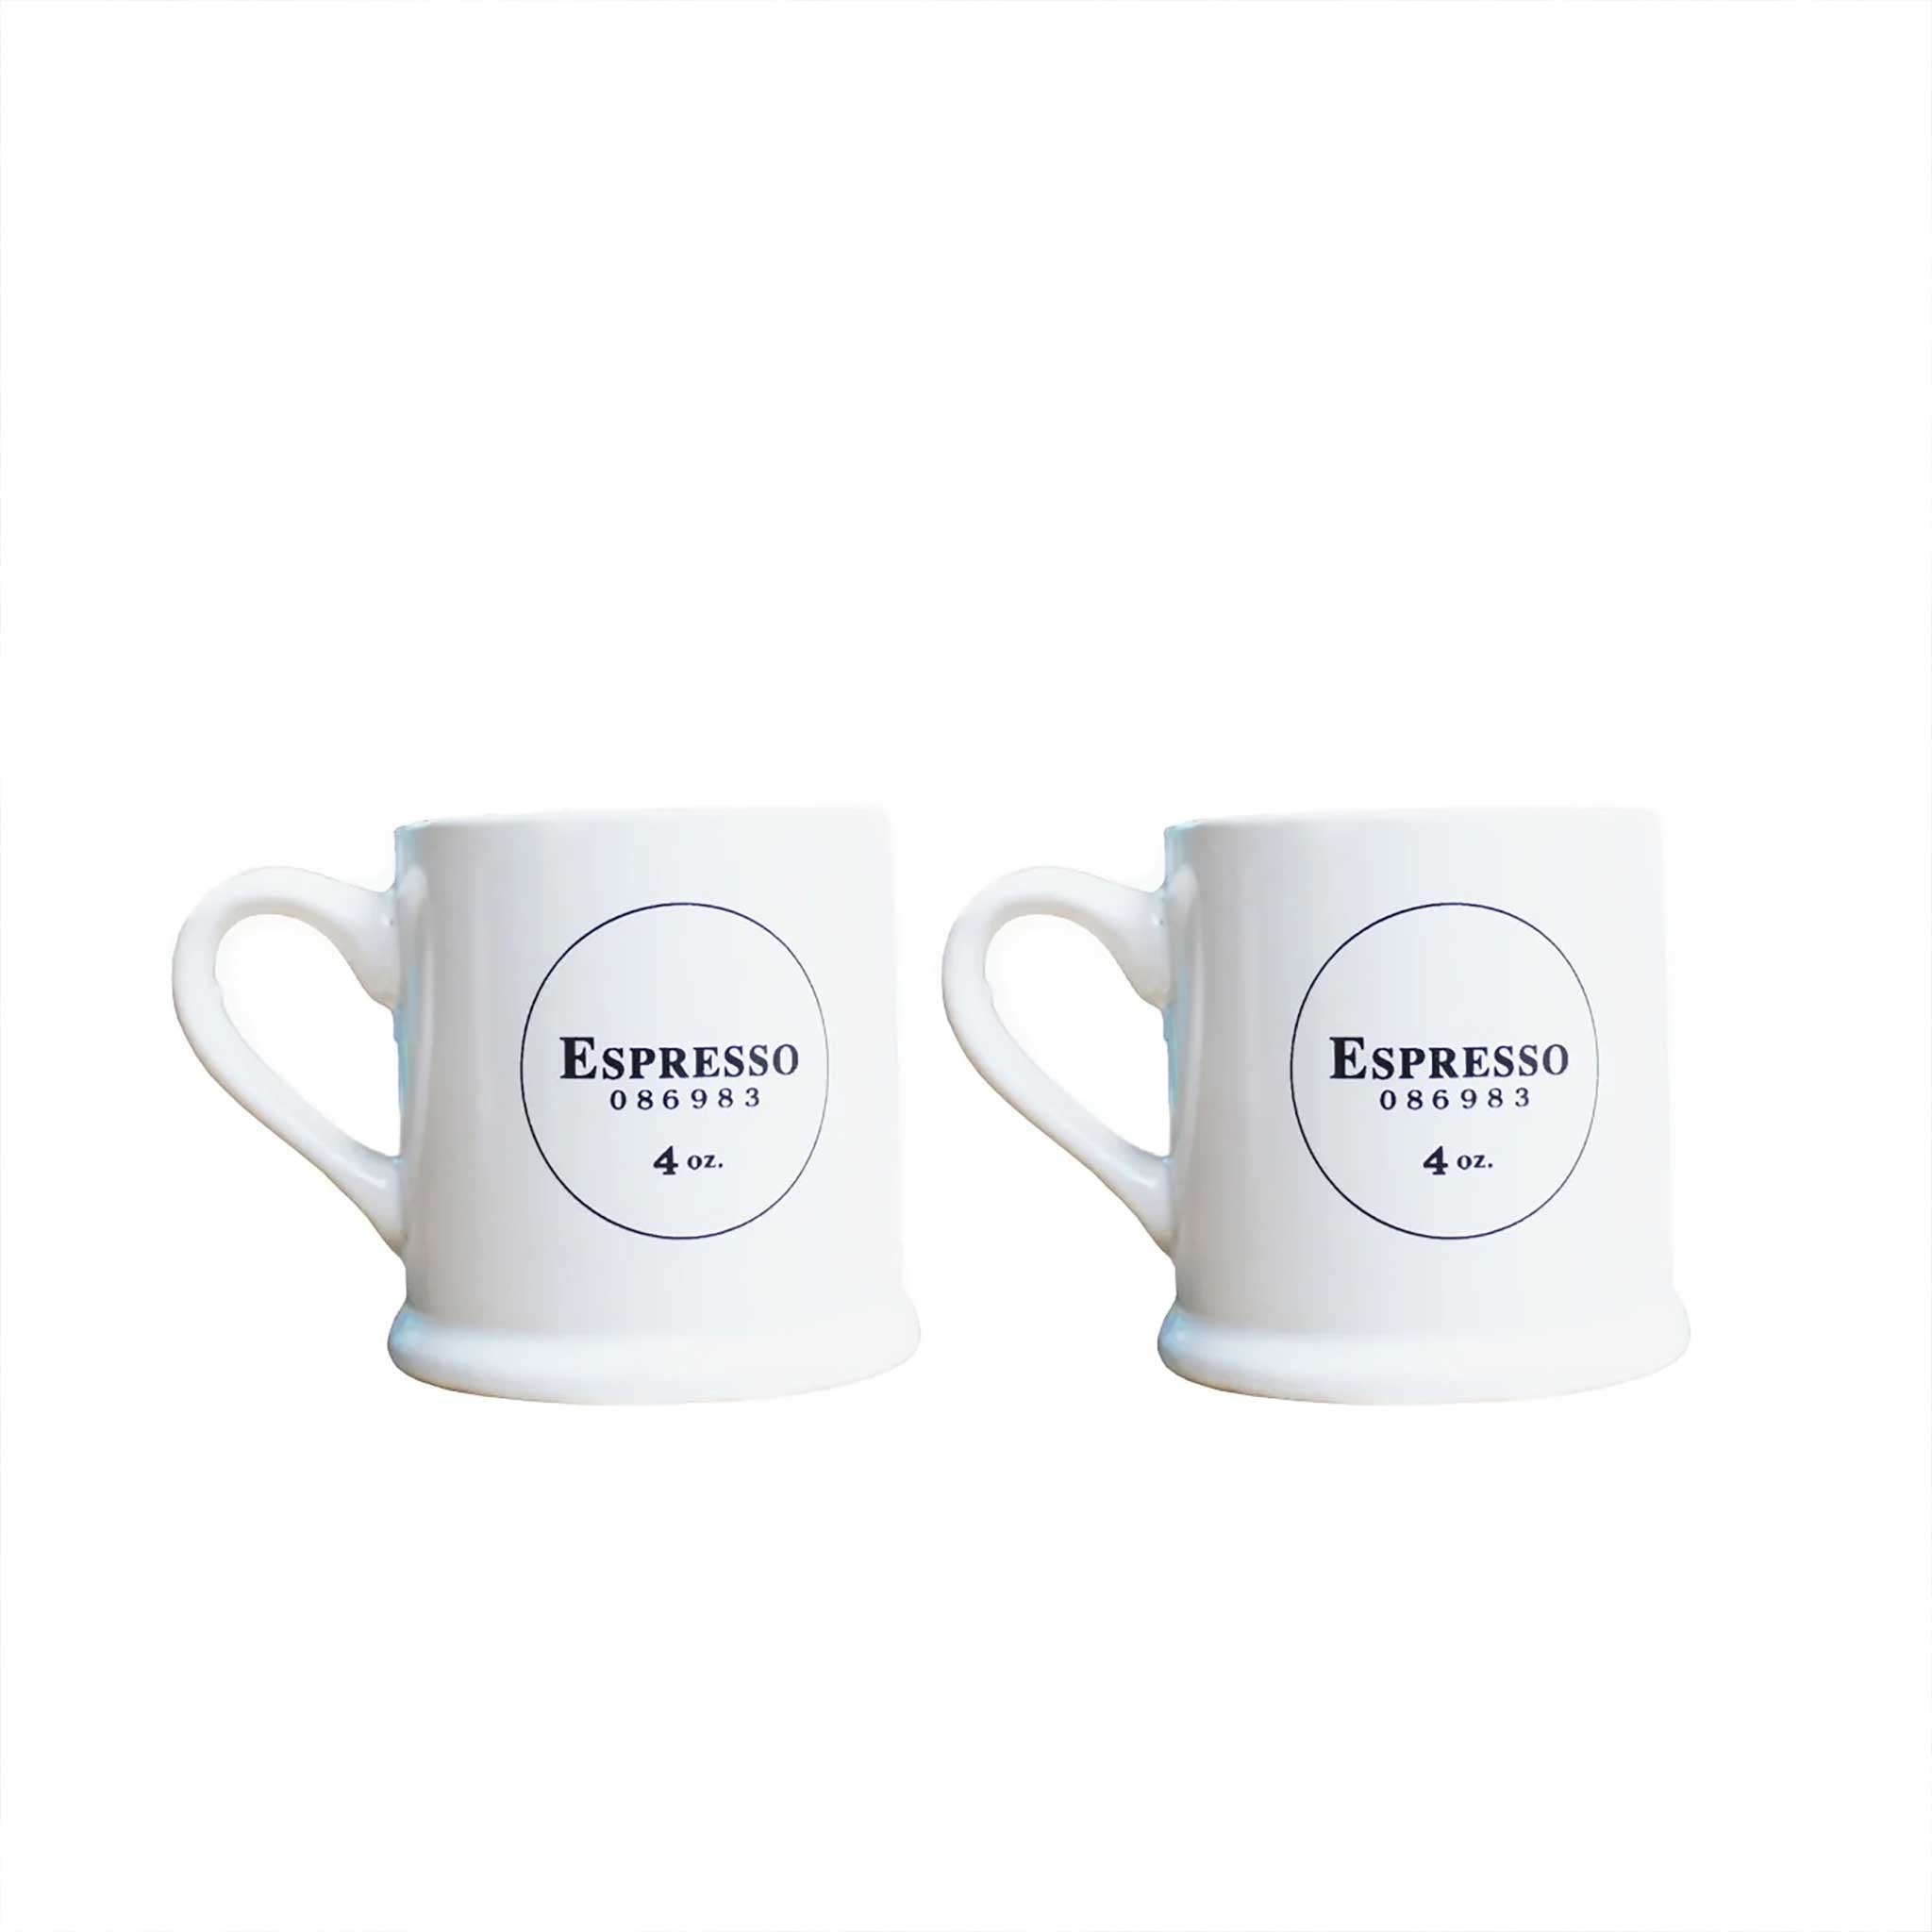 Two white espresso mugs with black detailed text from China Blue